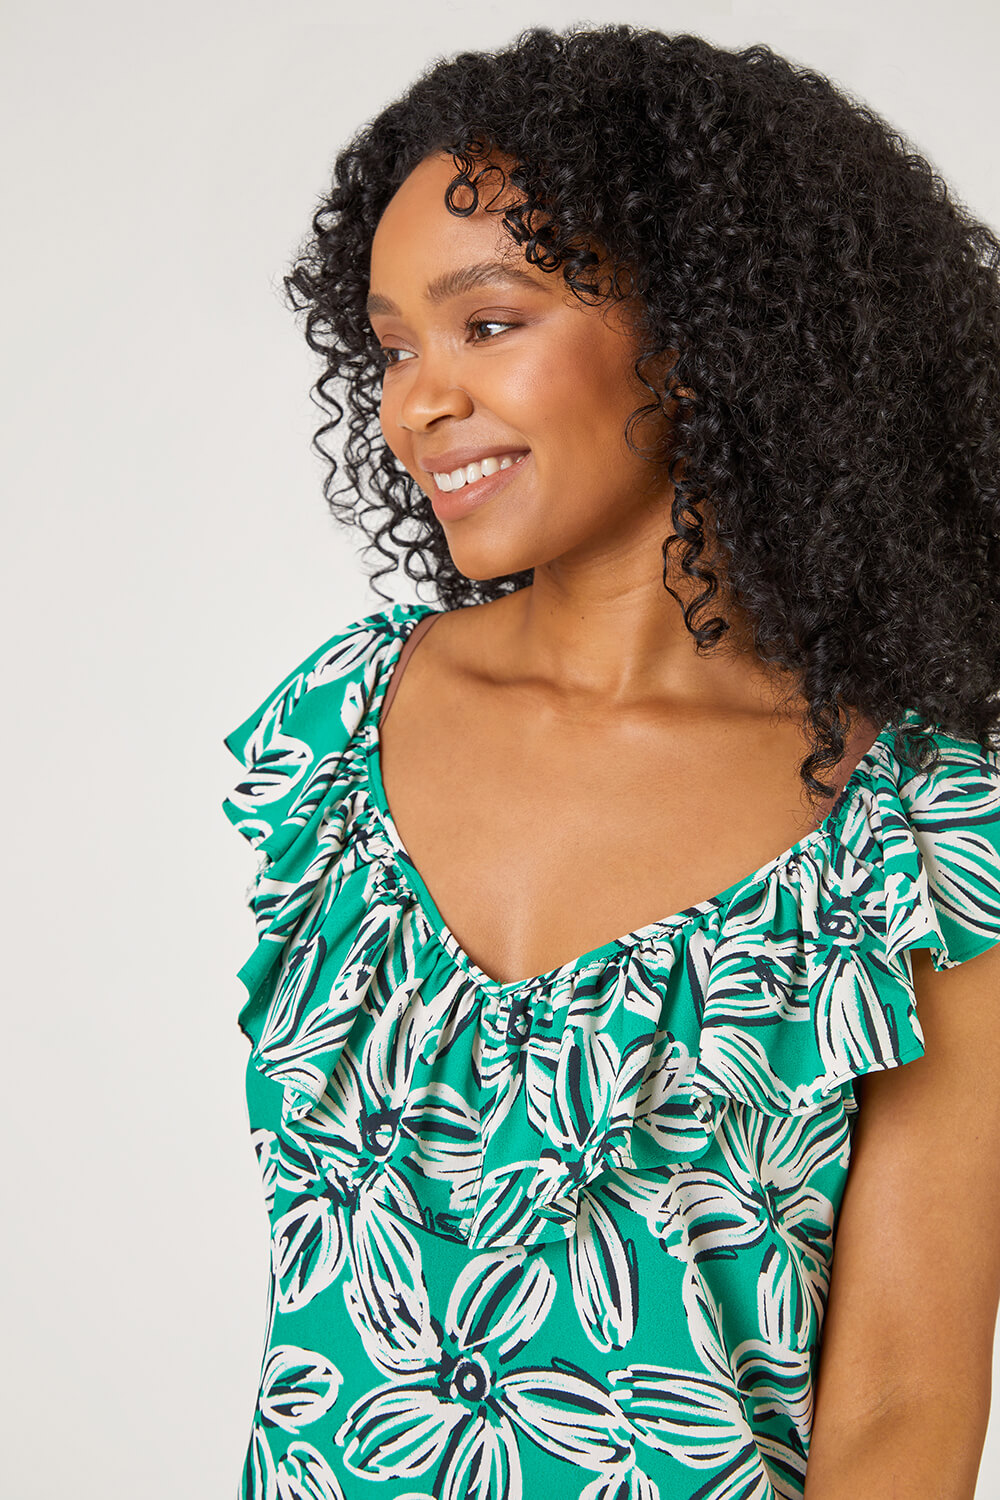 Green Petite Floral Print Frill Detail Top, Image 4 of 5